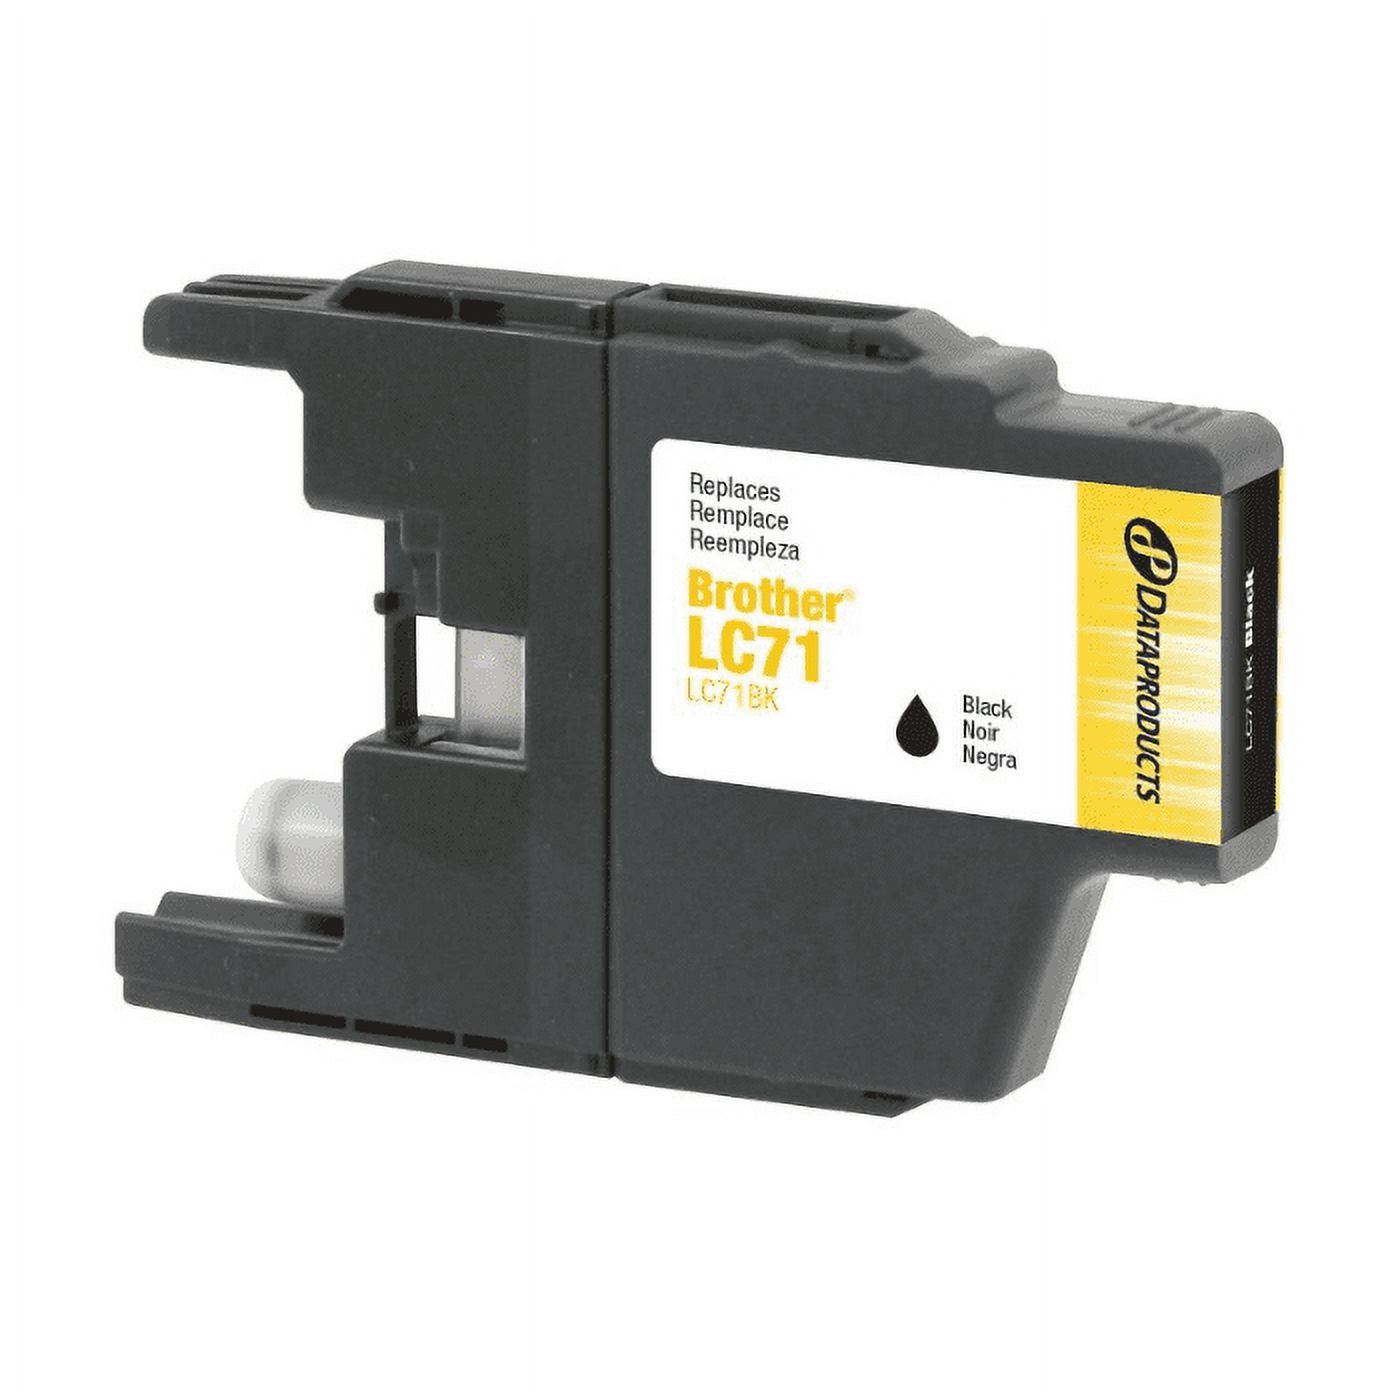 Dataproducts Standard Ink Cartridge Compatible with Brother LC 71 Series, Black - image 2 of 3